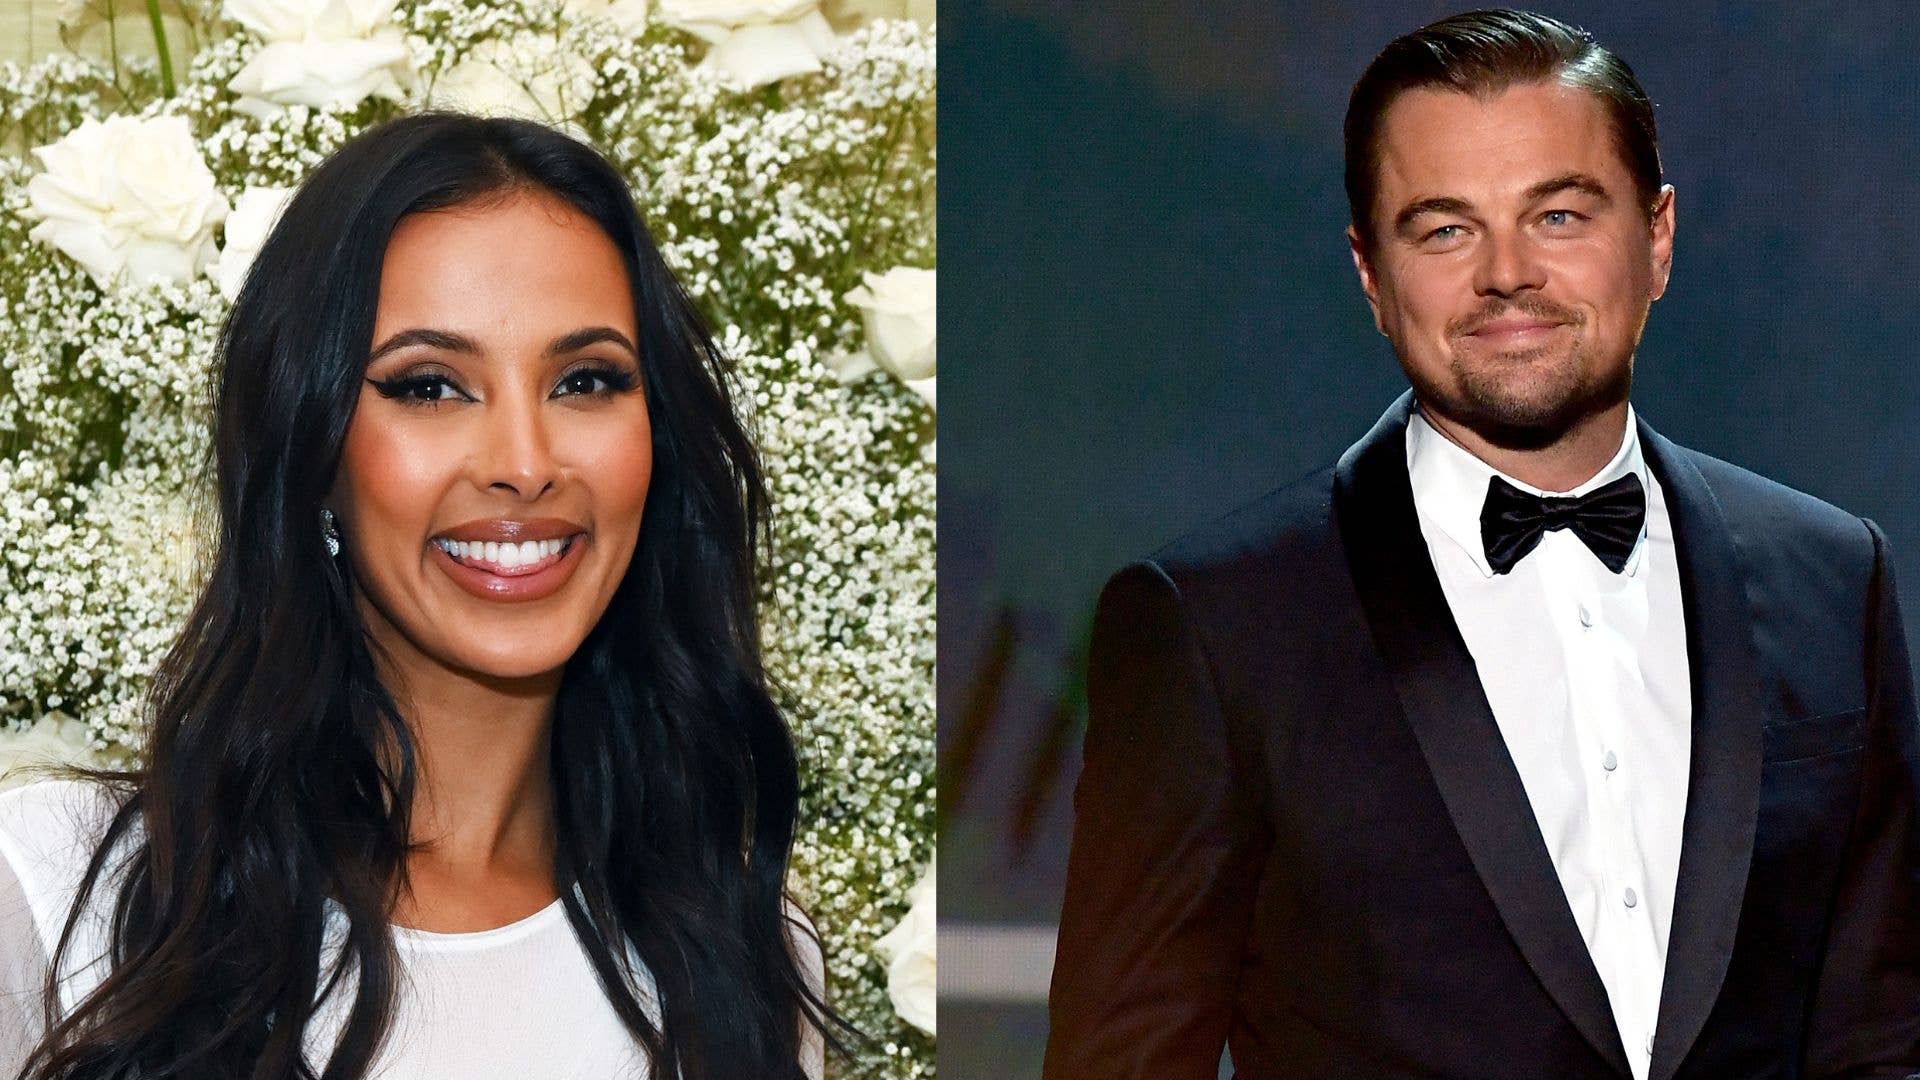 This is an image of Maya Jama on the left and Leonardo DiCaprio on the right